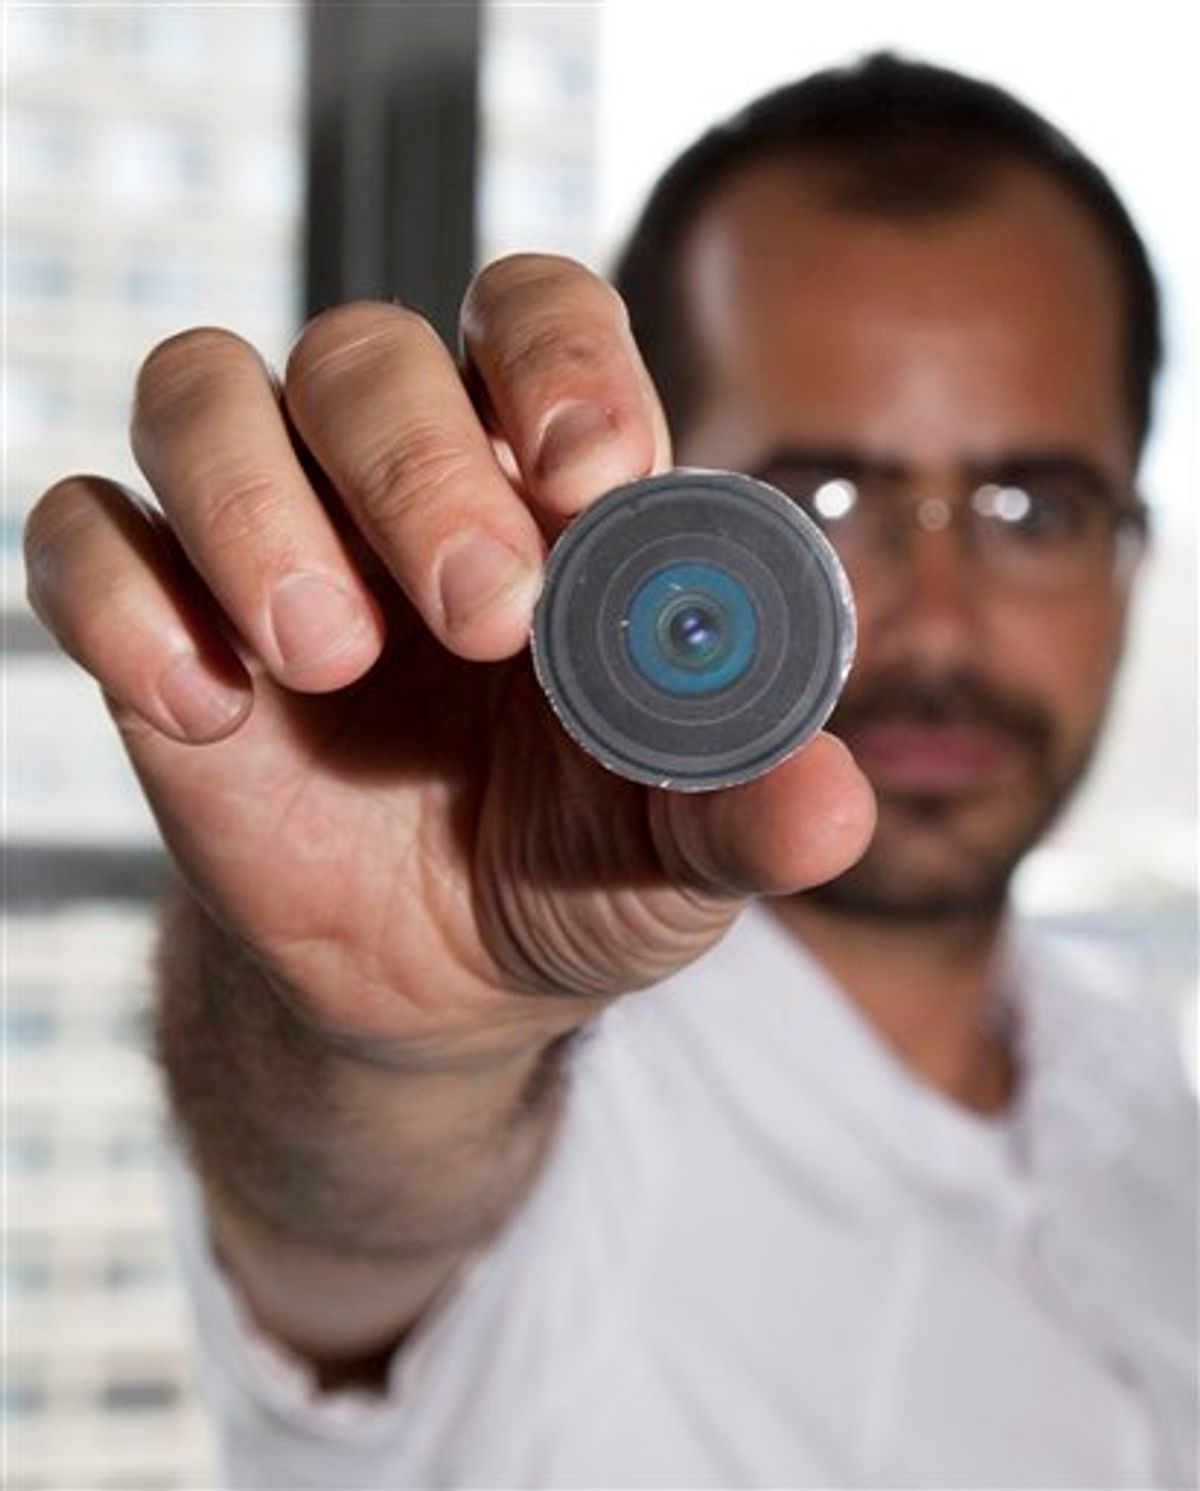 This Aug. 24, 2010 photo provided by New York University arts professor Wafaa Bilal, shows Bilal holding the prototype of a digital camera that he had implanted in the back of his head, in New York.  Bilal, a visual artist widely recognized for his interactive and performance pieces, has undergone surgery to implant a tiny camera in the back of his head for an artwork commissioned by a new museum in Doha, Qatar. Titled "The 3rd I," it is one of 23 contemporary works commissioned for the opening of Mathaf: Arab Museum of Modern Art on Dec. 30, 2010. (AP Photo/Wafaa Bila, Bard Farwell) NO SALES (AP)